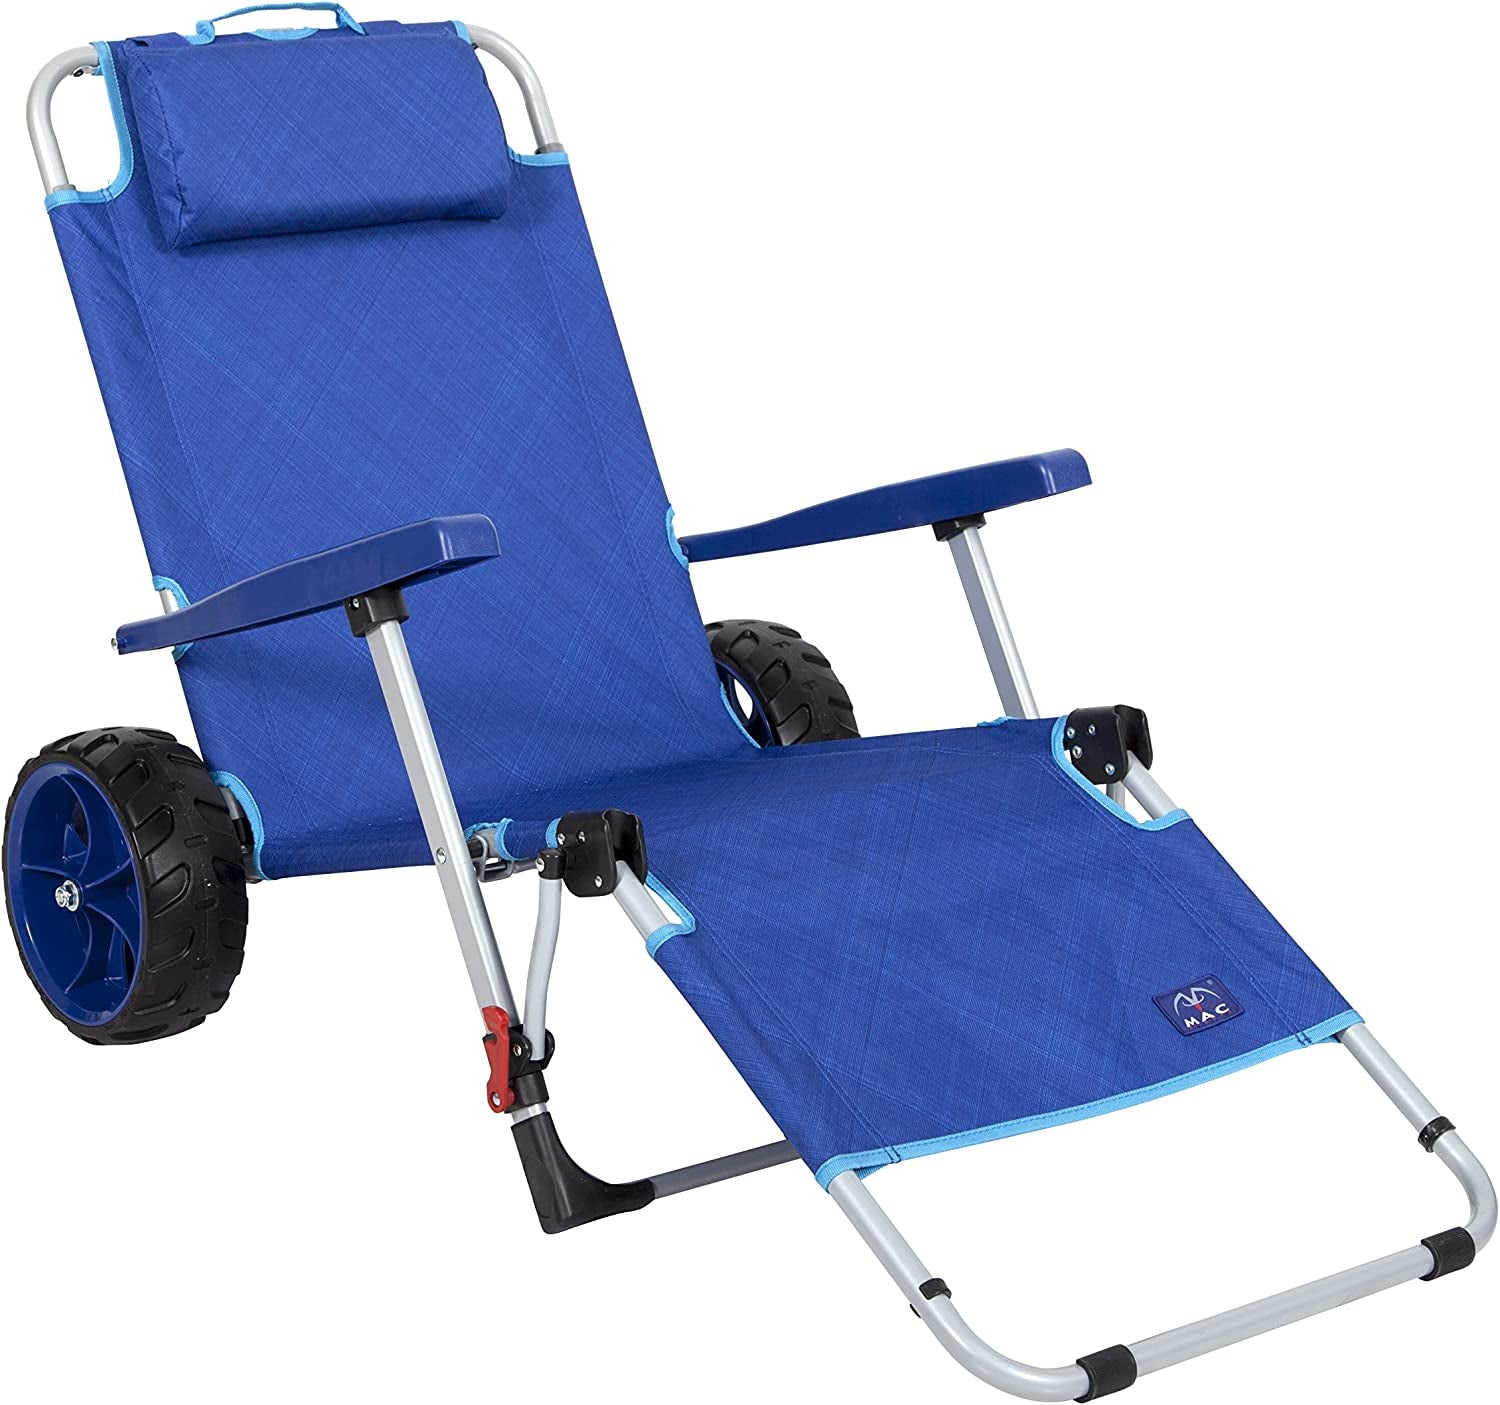 MacSports, Mac Sports 2-In-1 Beach Day Folding Lounge Chair+Cargo Cart for Outdoors Sunbathing | Sun Chair, Tanning Chair, Portable, Lightweight, Lounger for Patio, Collapsible with All-Terrain Wheels | Blue